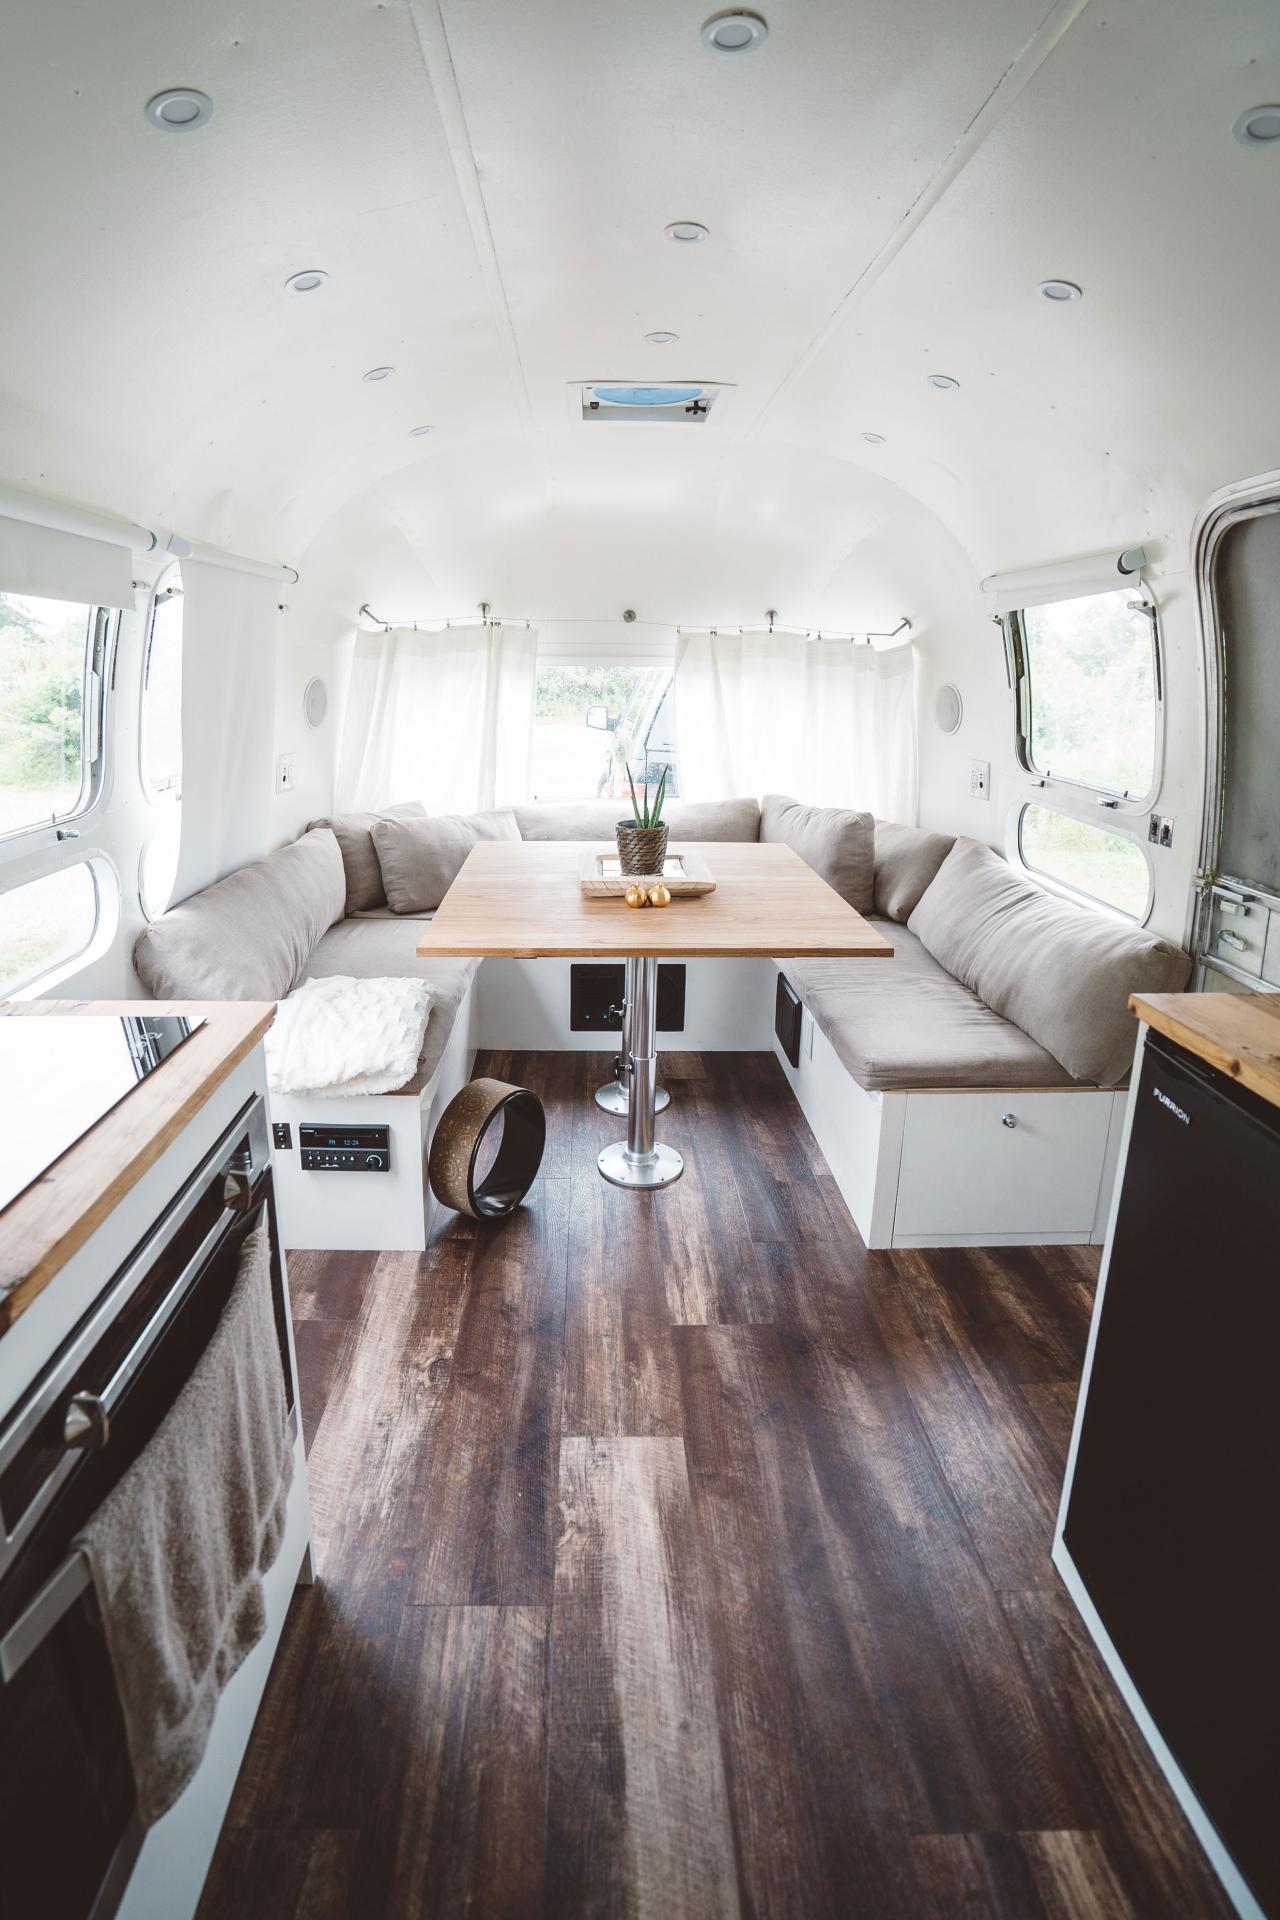 Autocamp's Luxury Airstream Trailers Let You Own the Outdoors in Style -  Maxim